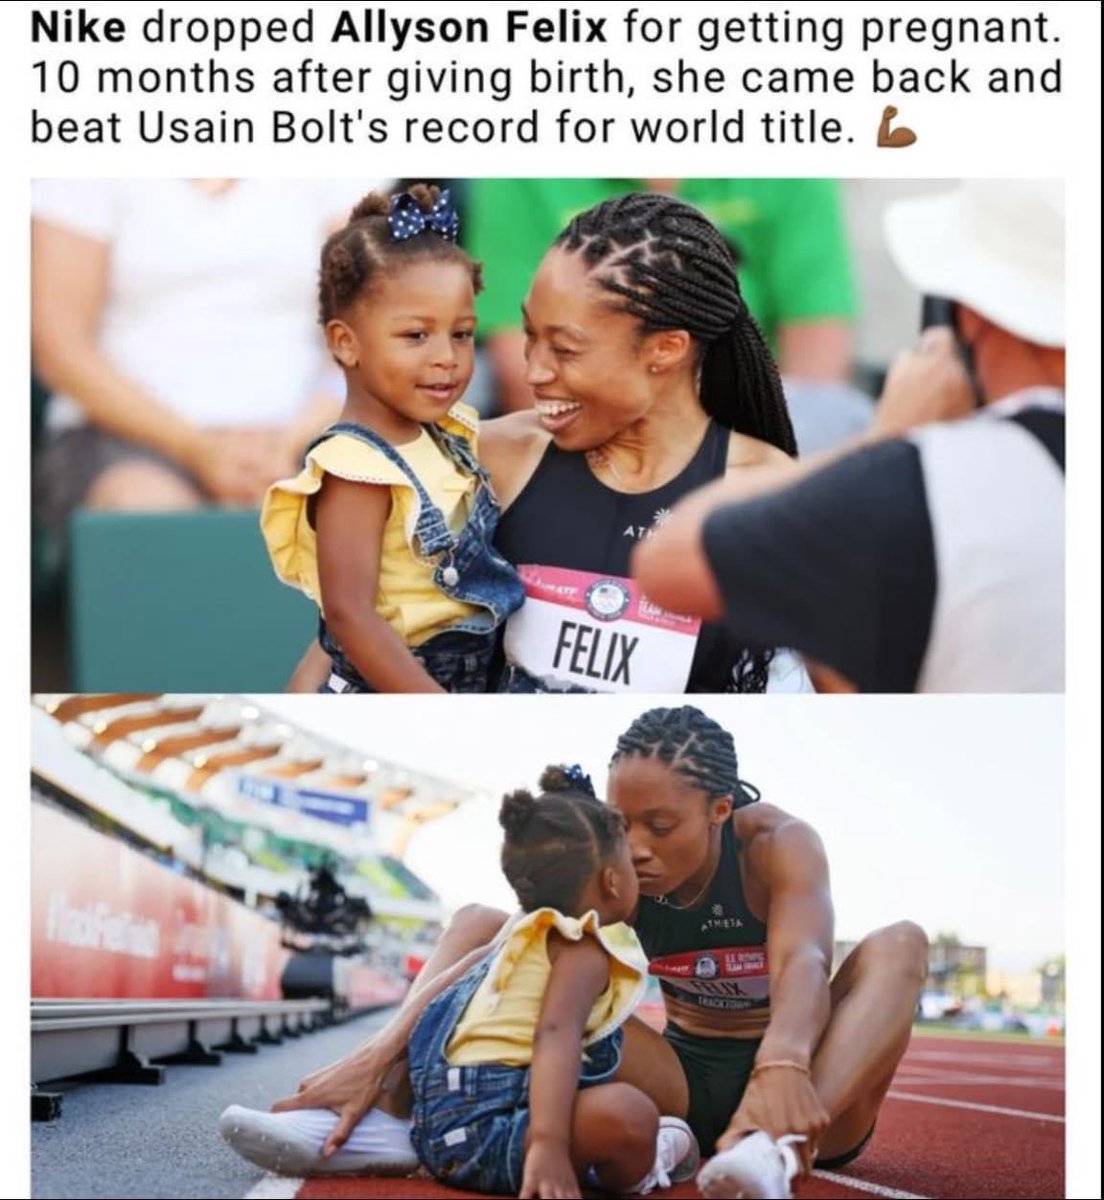 I love that for her! She proved she didn’t need @Nike anyway and started her own brand Saysh @BySaysh congrats @allysonfelix #allysonfelix